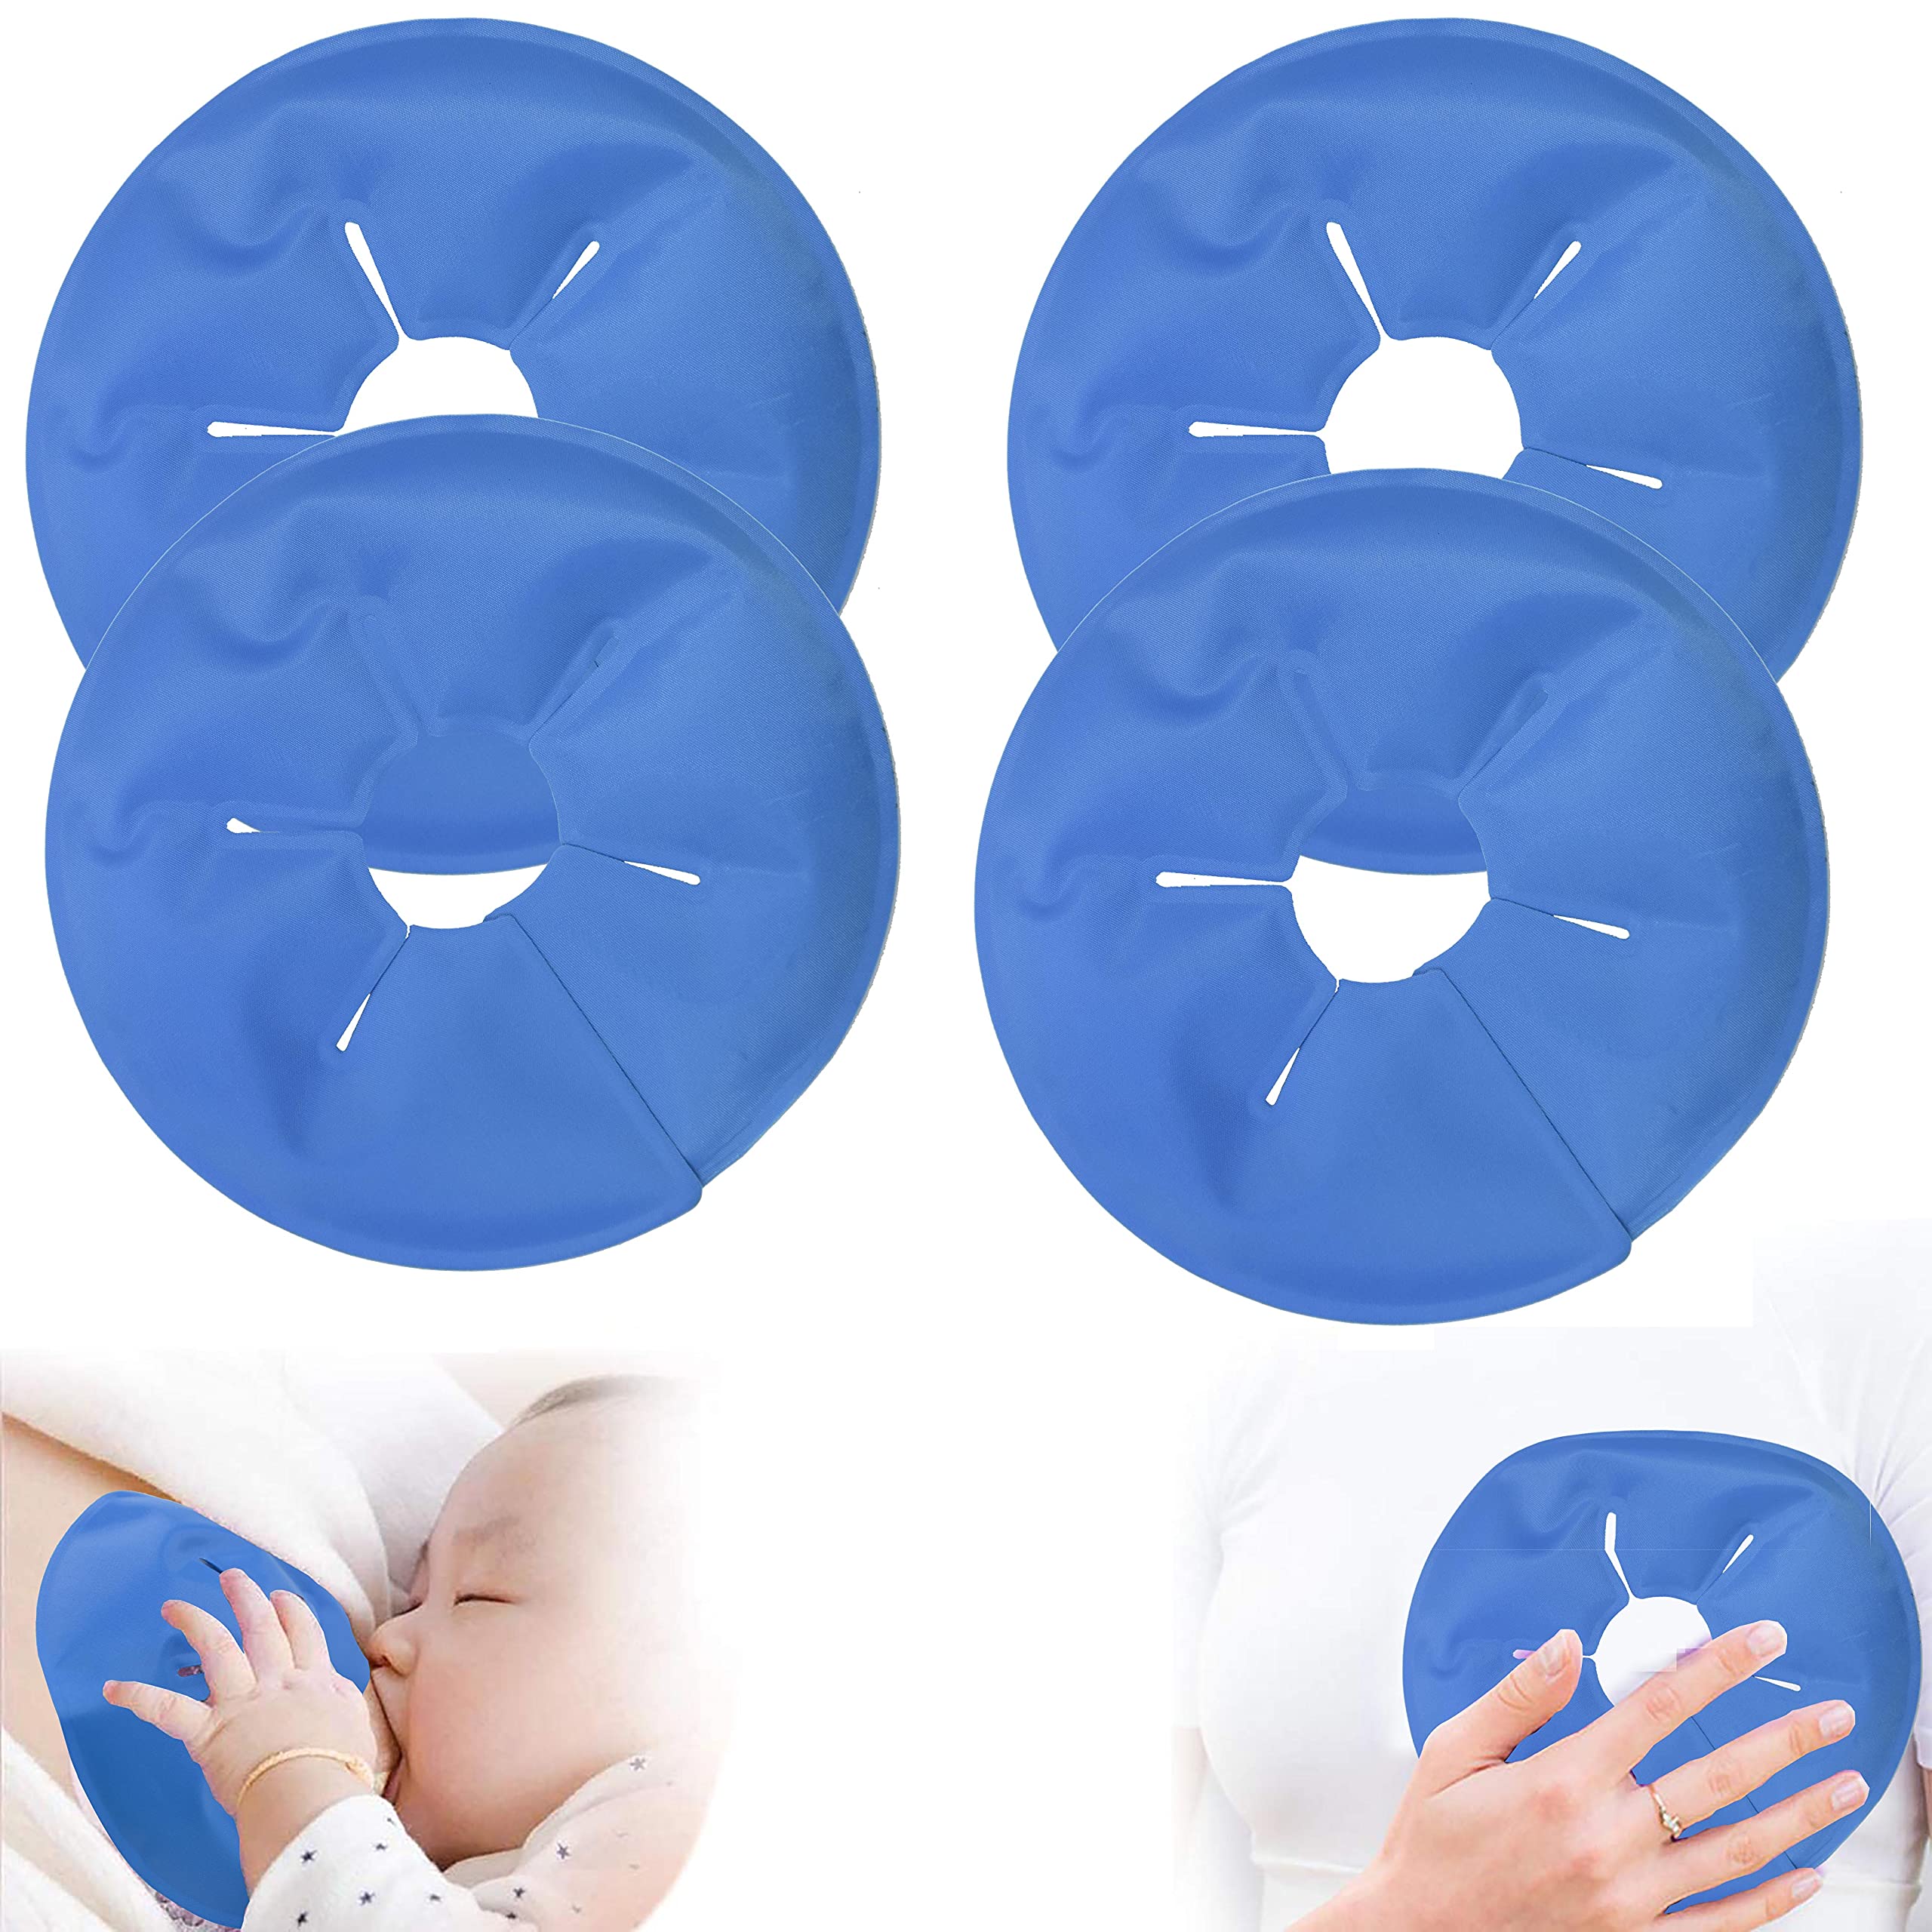 4 Pack Breast Therapy Pads Breast Ice Pack Hot Cold Breastfeeding Gel Pads  Boost Milk Let